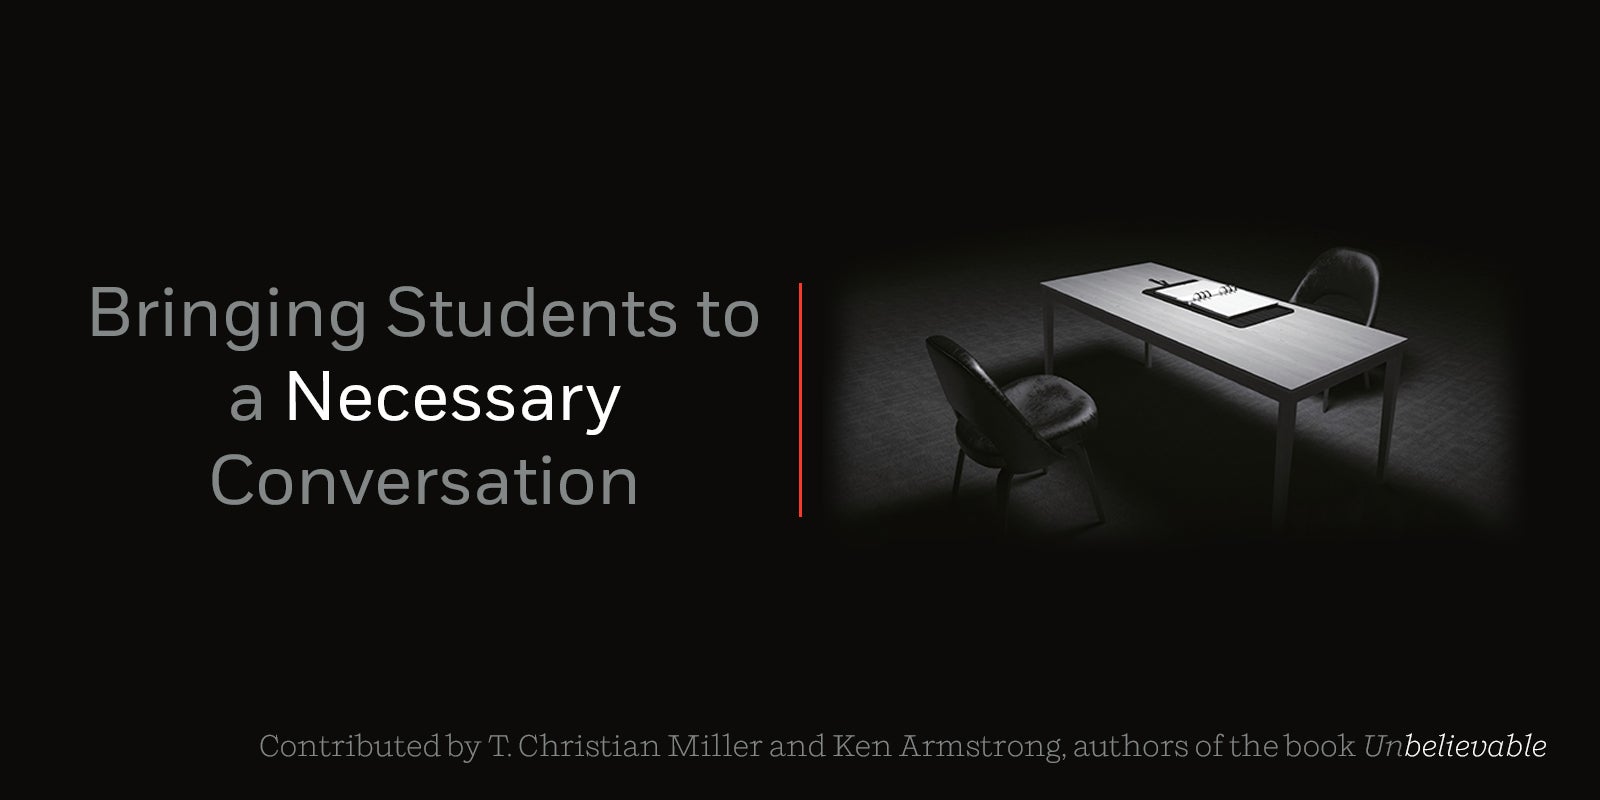 Bringing Students to a Necessary Conversation